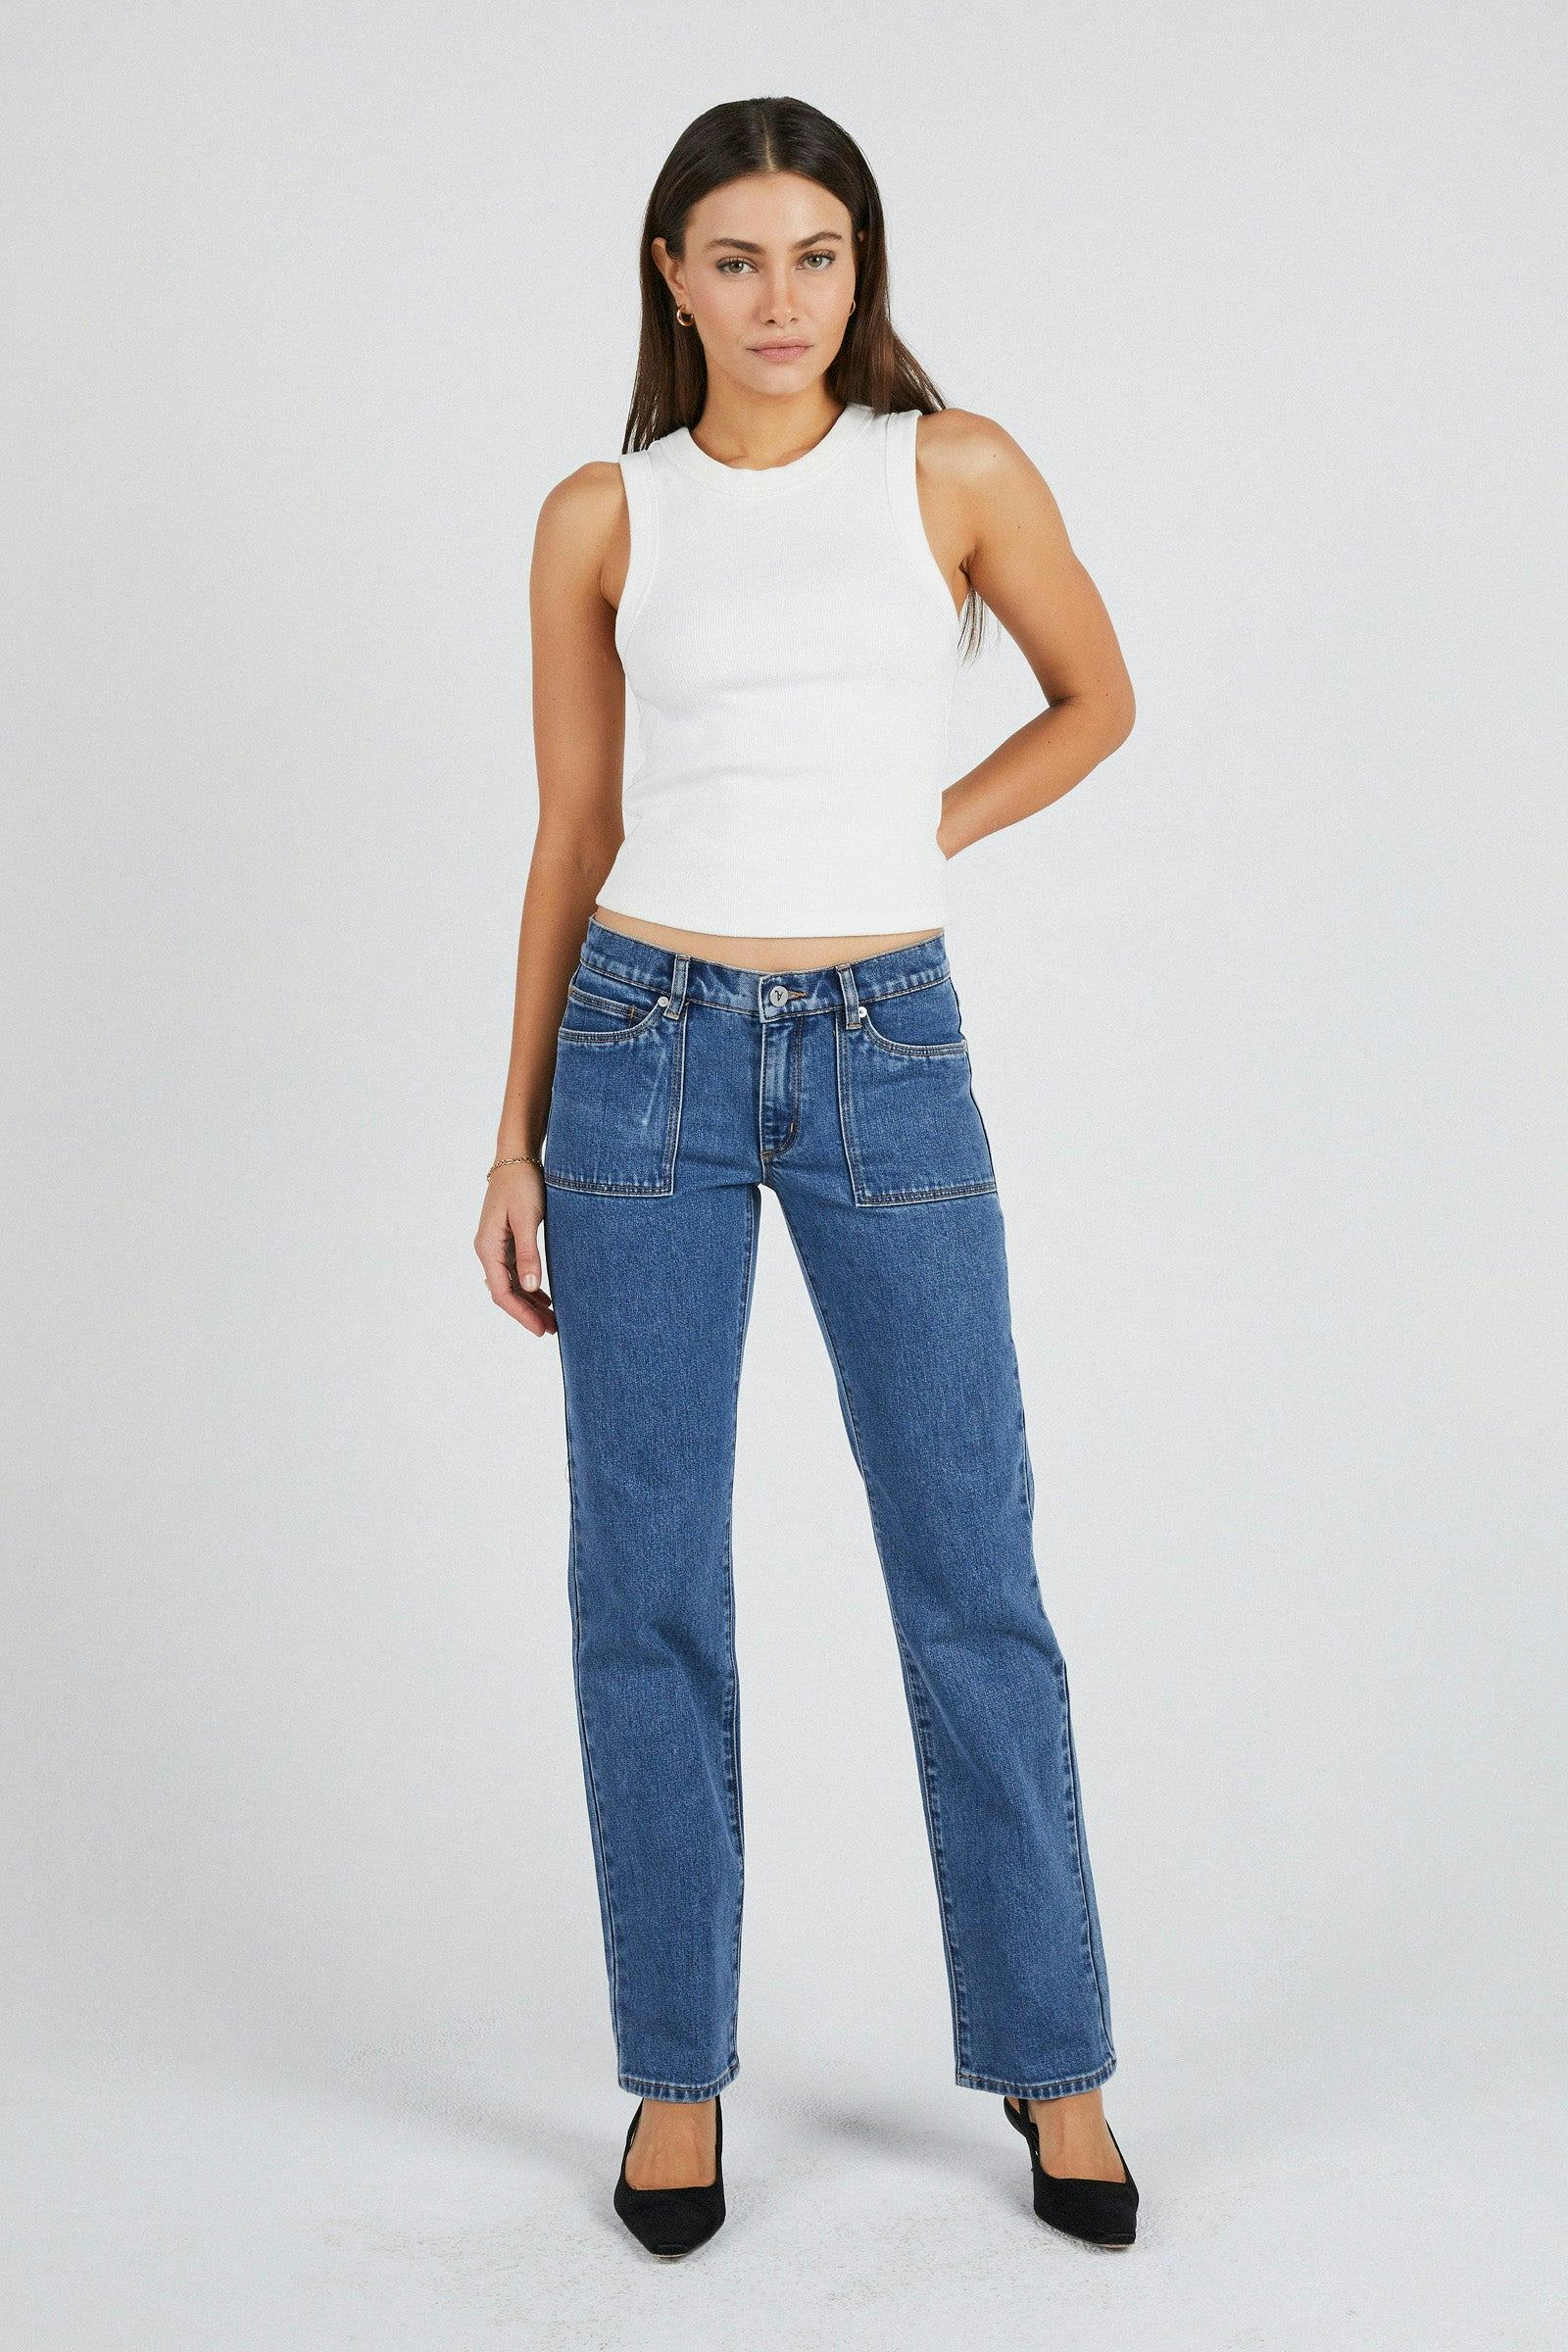 Denim Jeans For Women | Women\'s Jeans United States | Abrand US